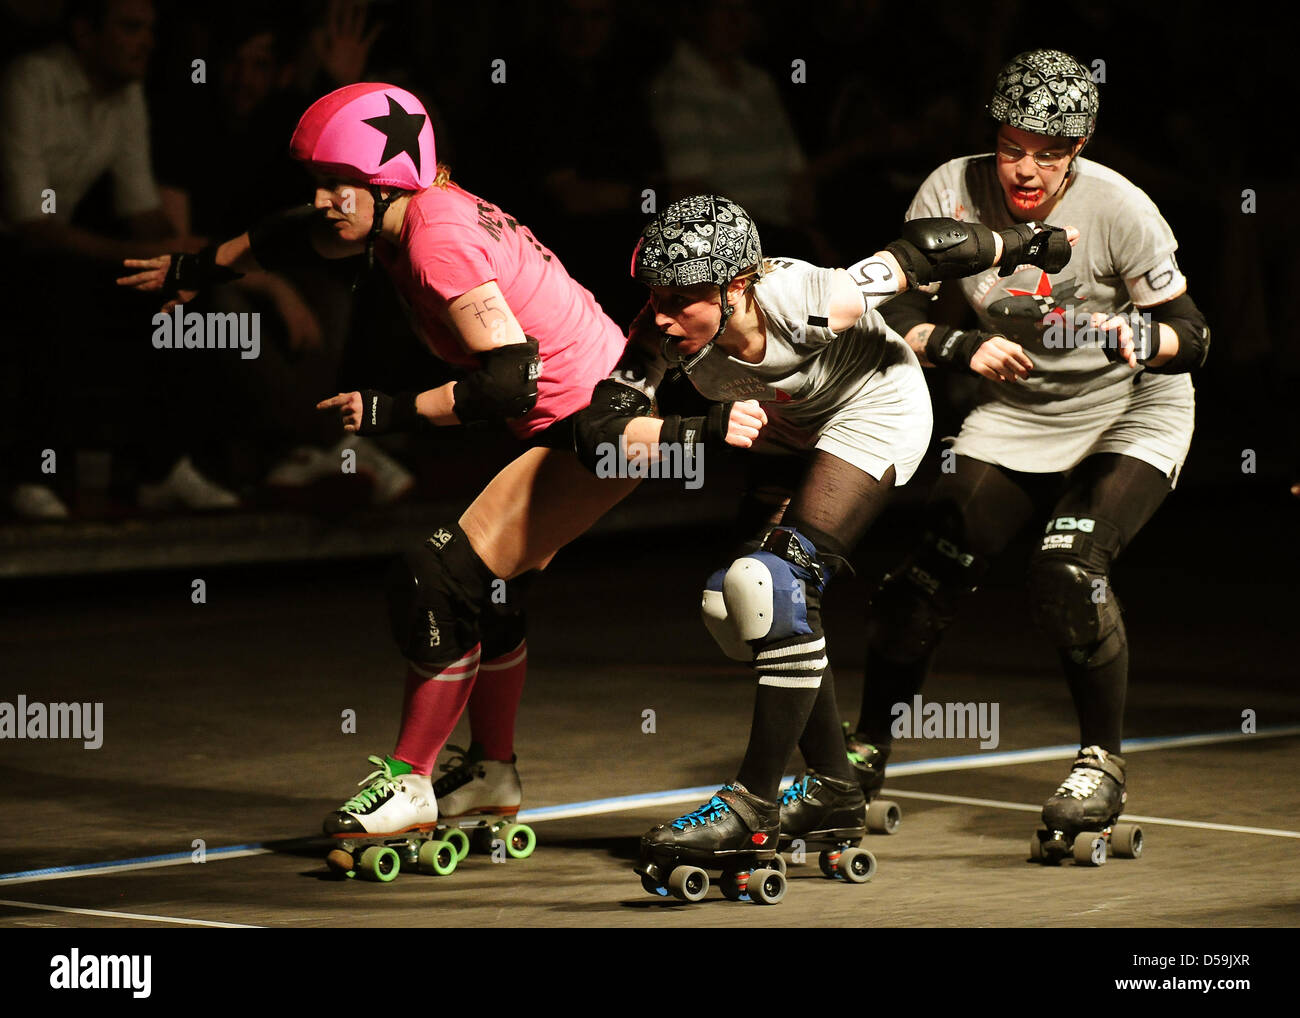 Female roller derby players of the 'Berlin Bombshells' (grey) and the  London team 'Brawl Saints' (pink) compete in Berlin, Germany on 26 June  2010. Roller derby is a full contact sport from